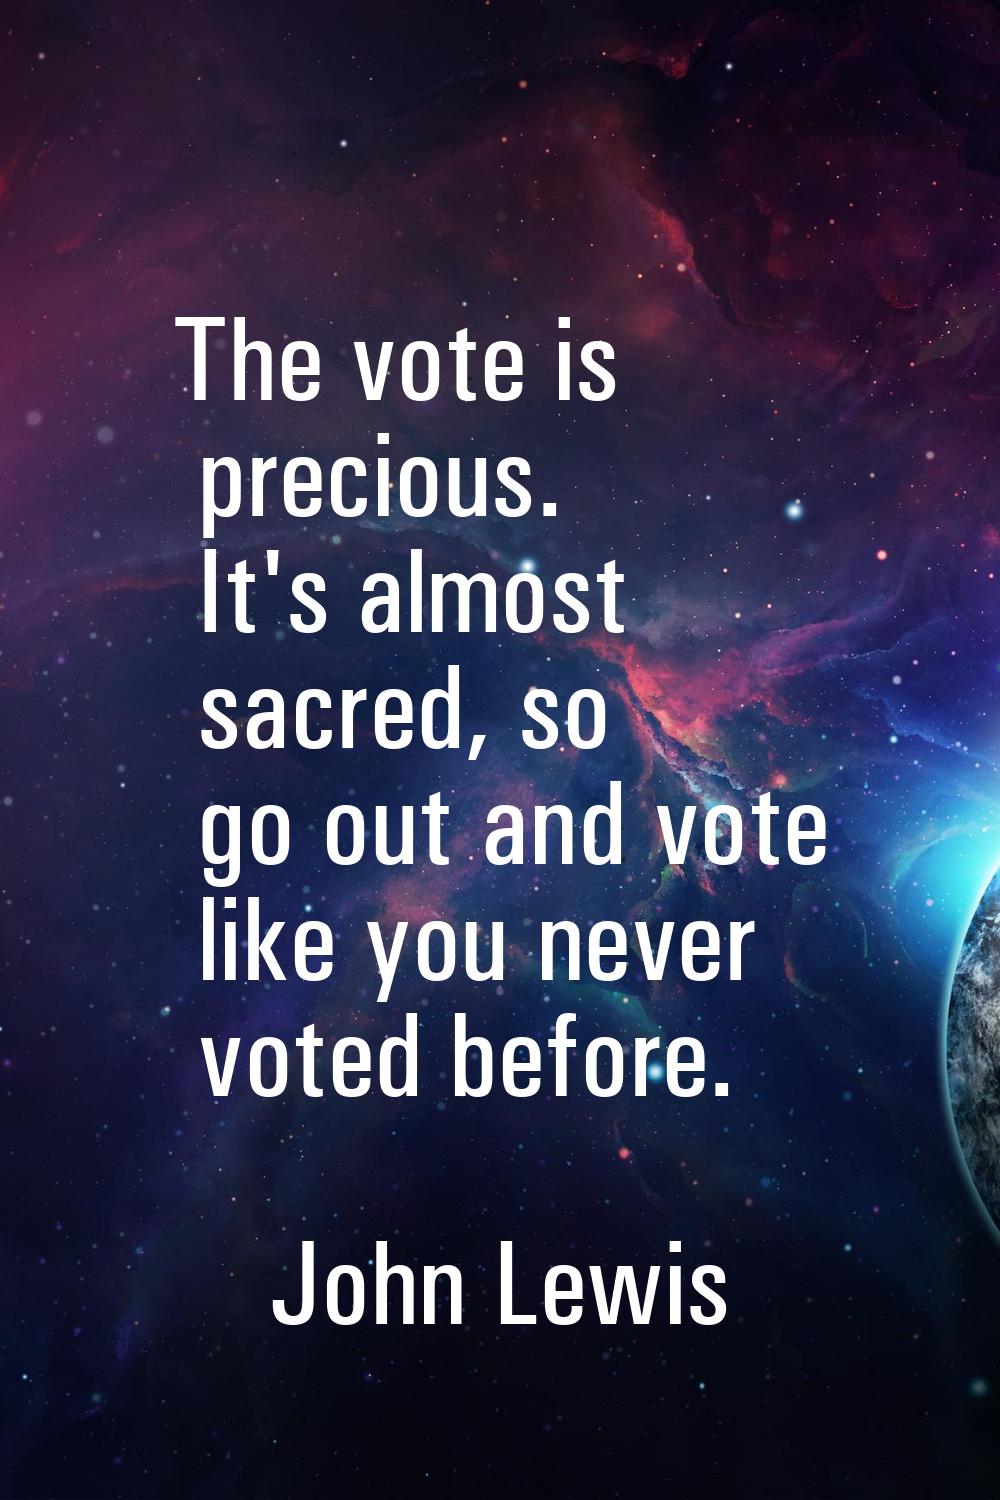 The vote is precious. It's almost sacred, so go out and vote like you never voted before.